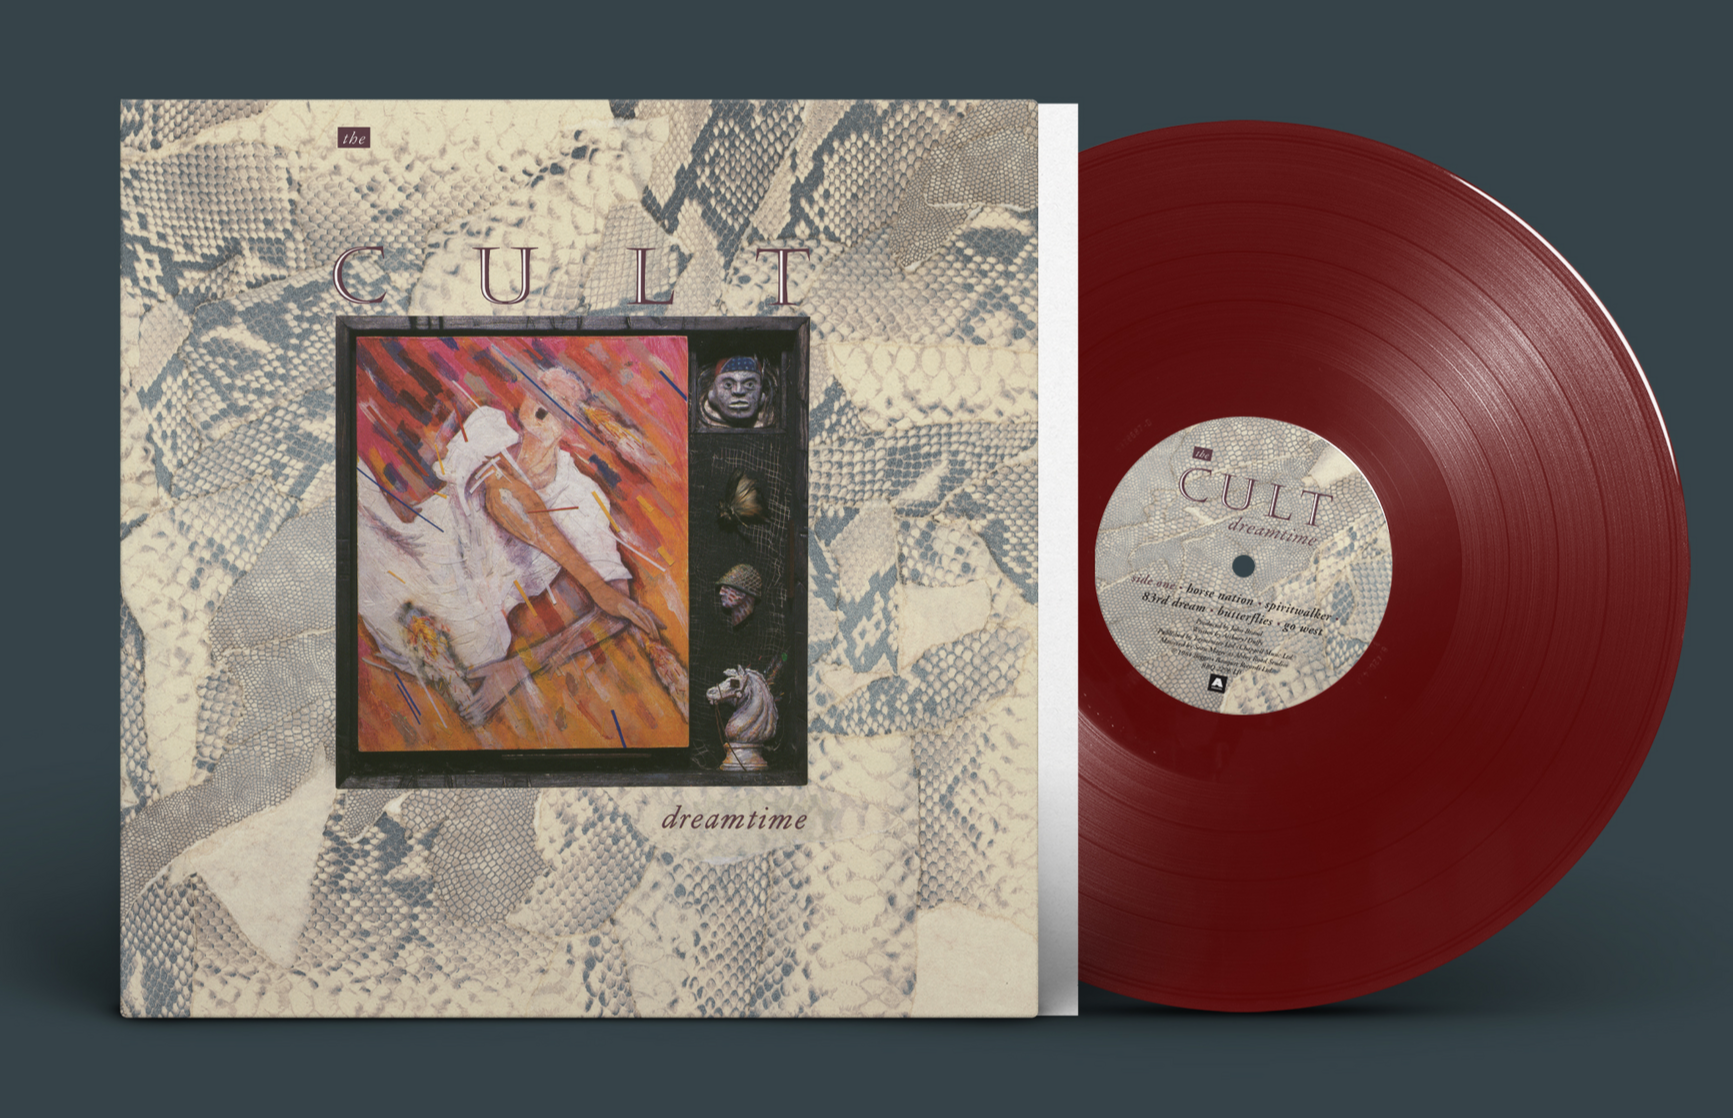 Buy The Cult - Dreamtime (Indie Exclusive, Oxblood Red Vinyl)